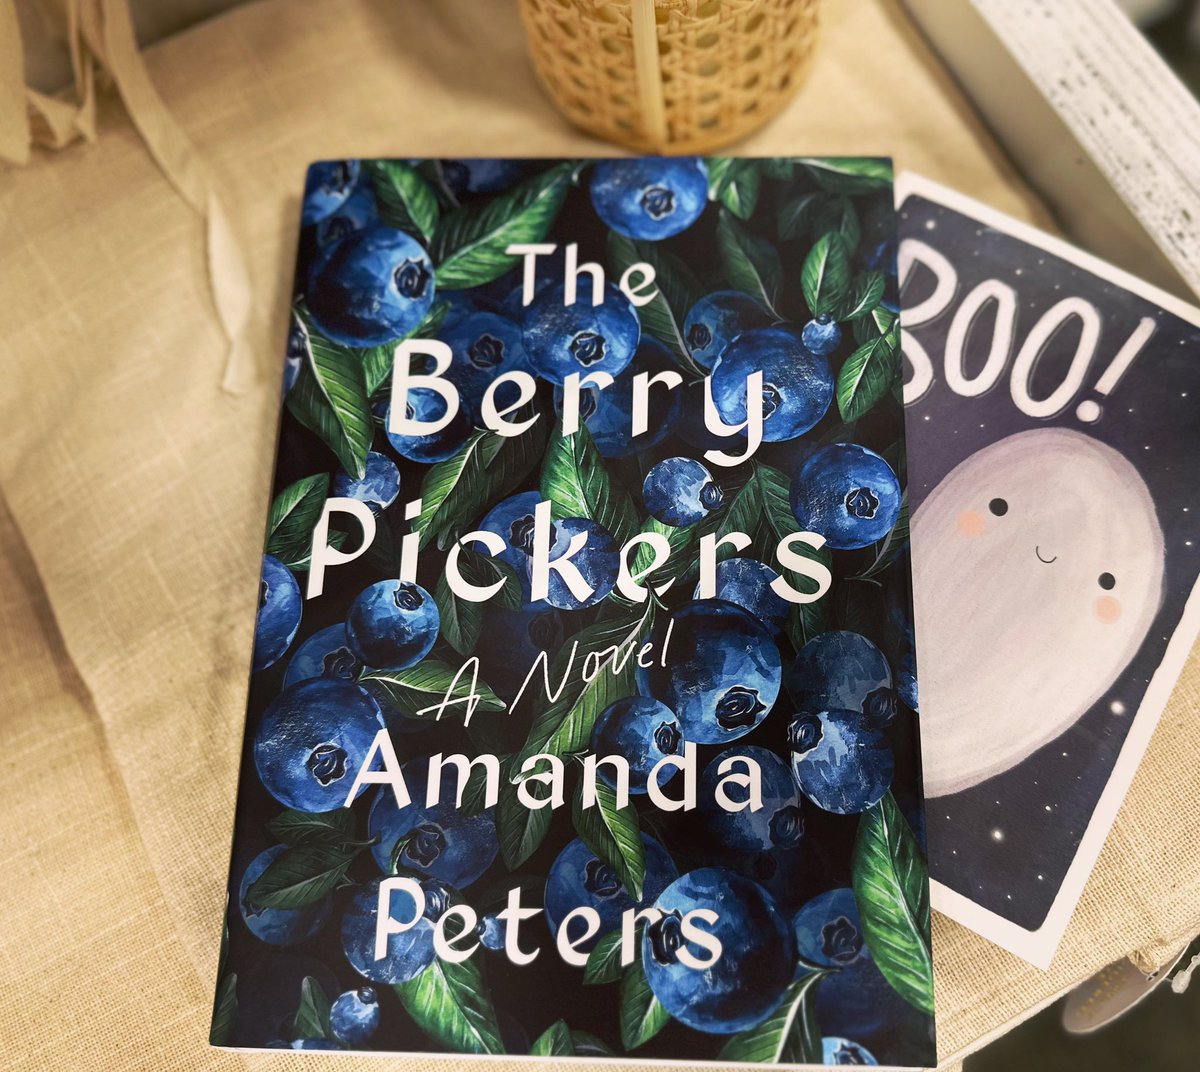 Berry picking season may have come and gone, but you shoulddefinitely pick up Amanda Peter’s #TheBerryPickers, our November Discover Pick! 

(P.s. #HappyHalloween!) 

#bookstagram #barnesandnoble #amandapeters #bookreccomendations #dfw #bndiscoverpick  #bnrichardsontx